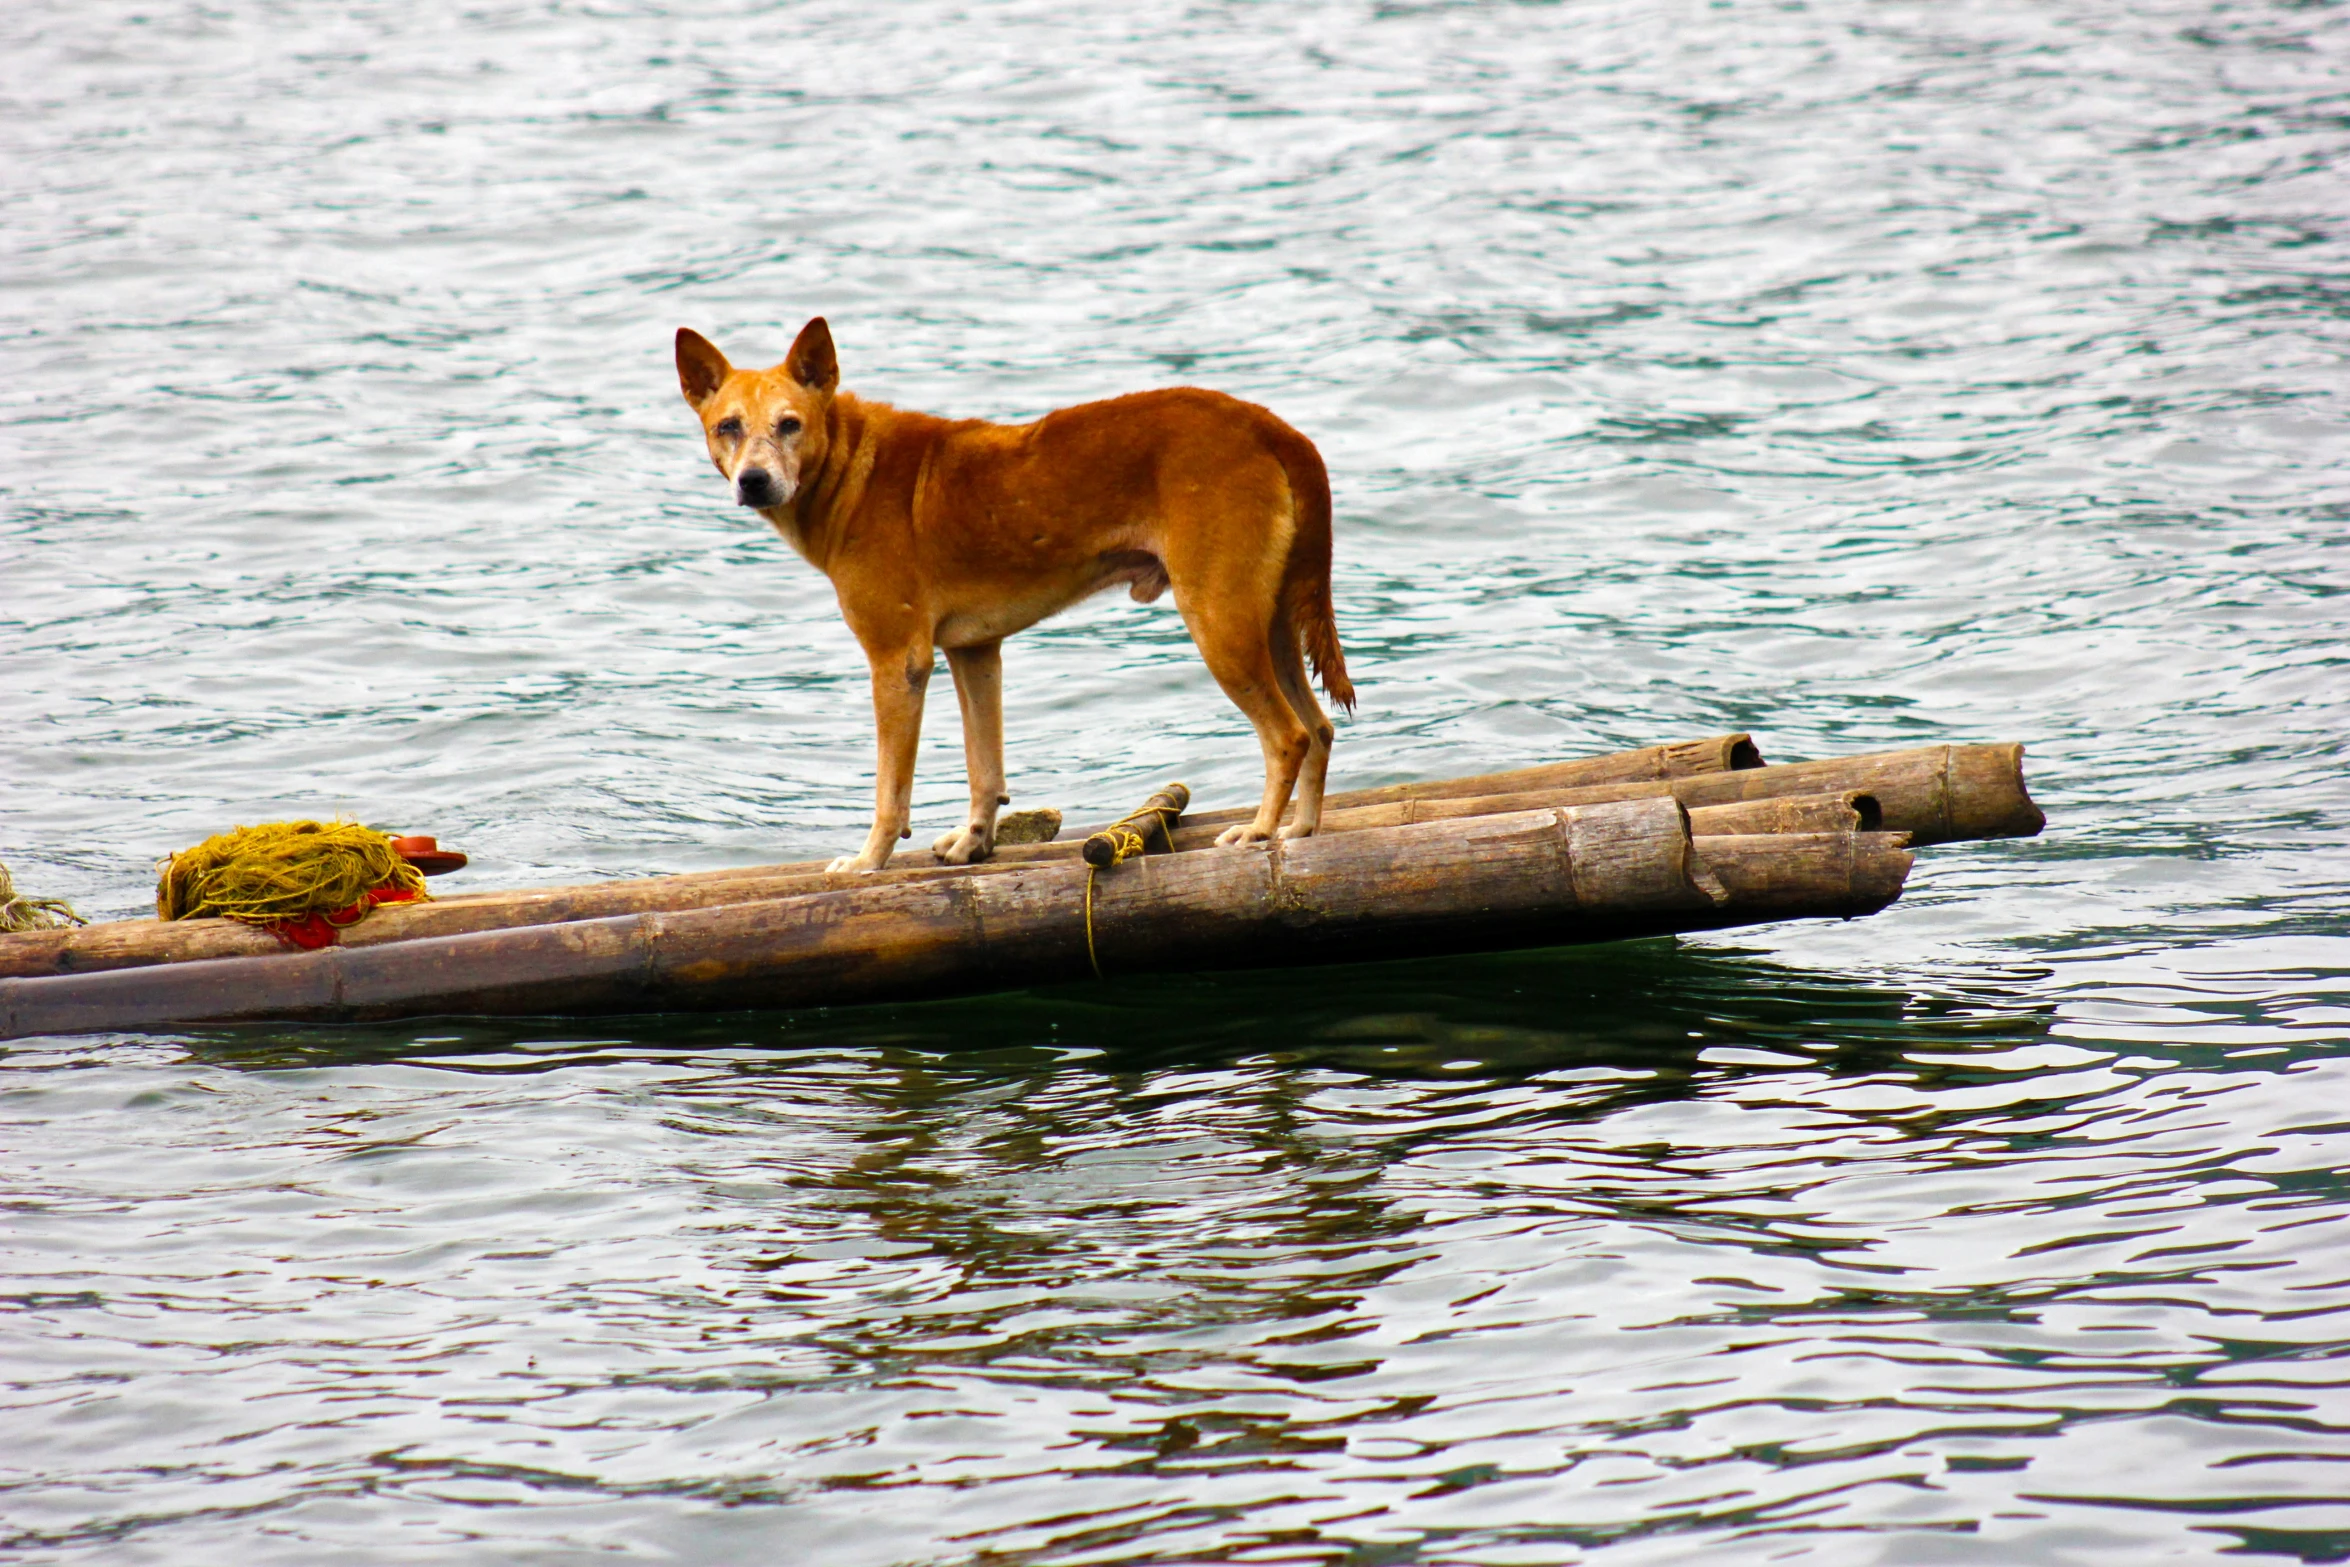 the brown dog is standing on a log in the water